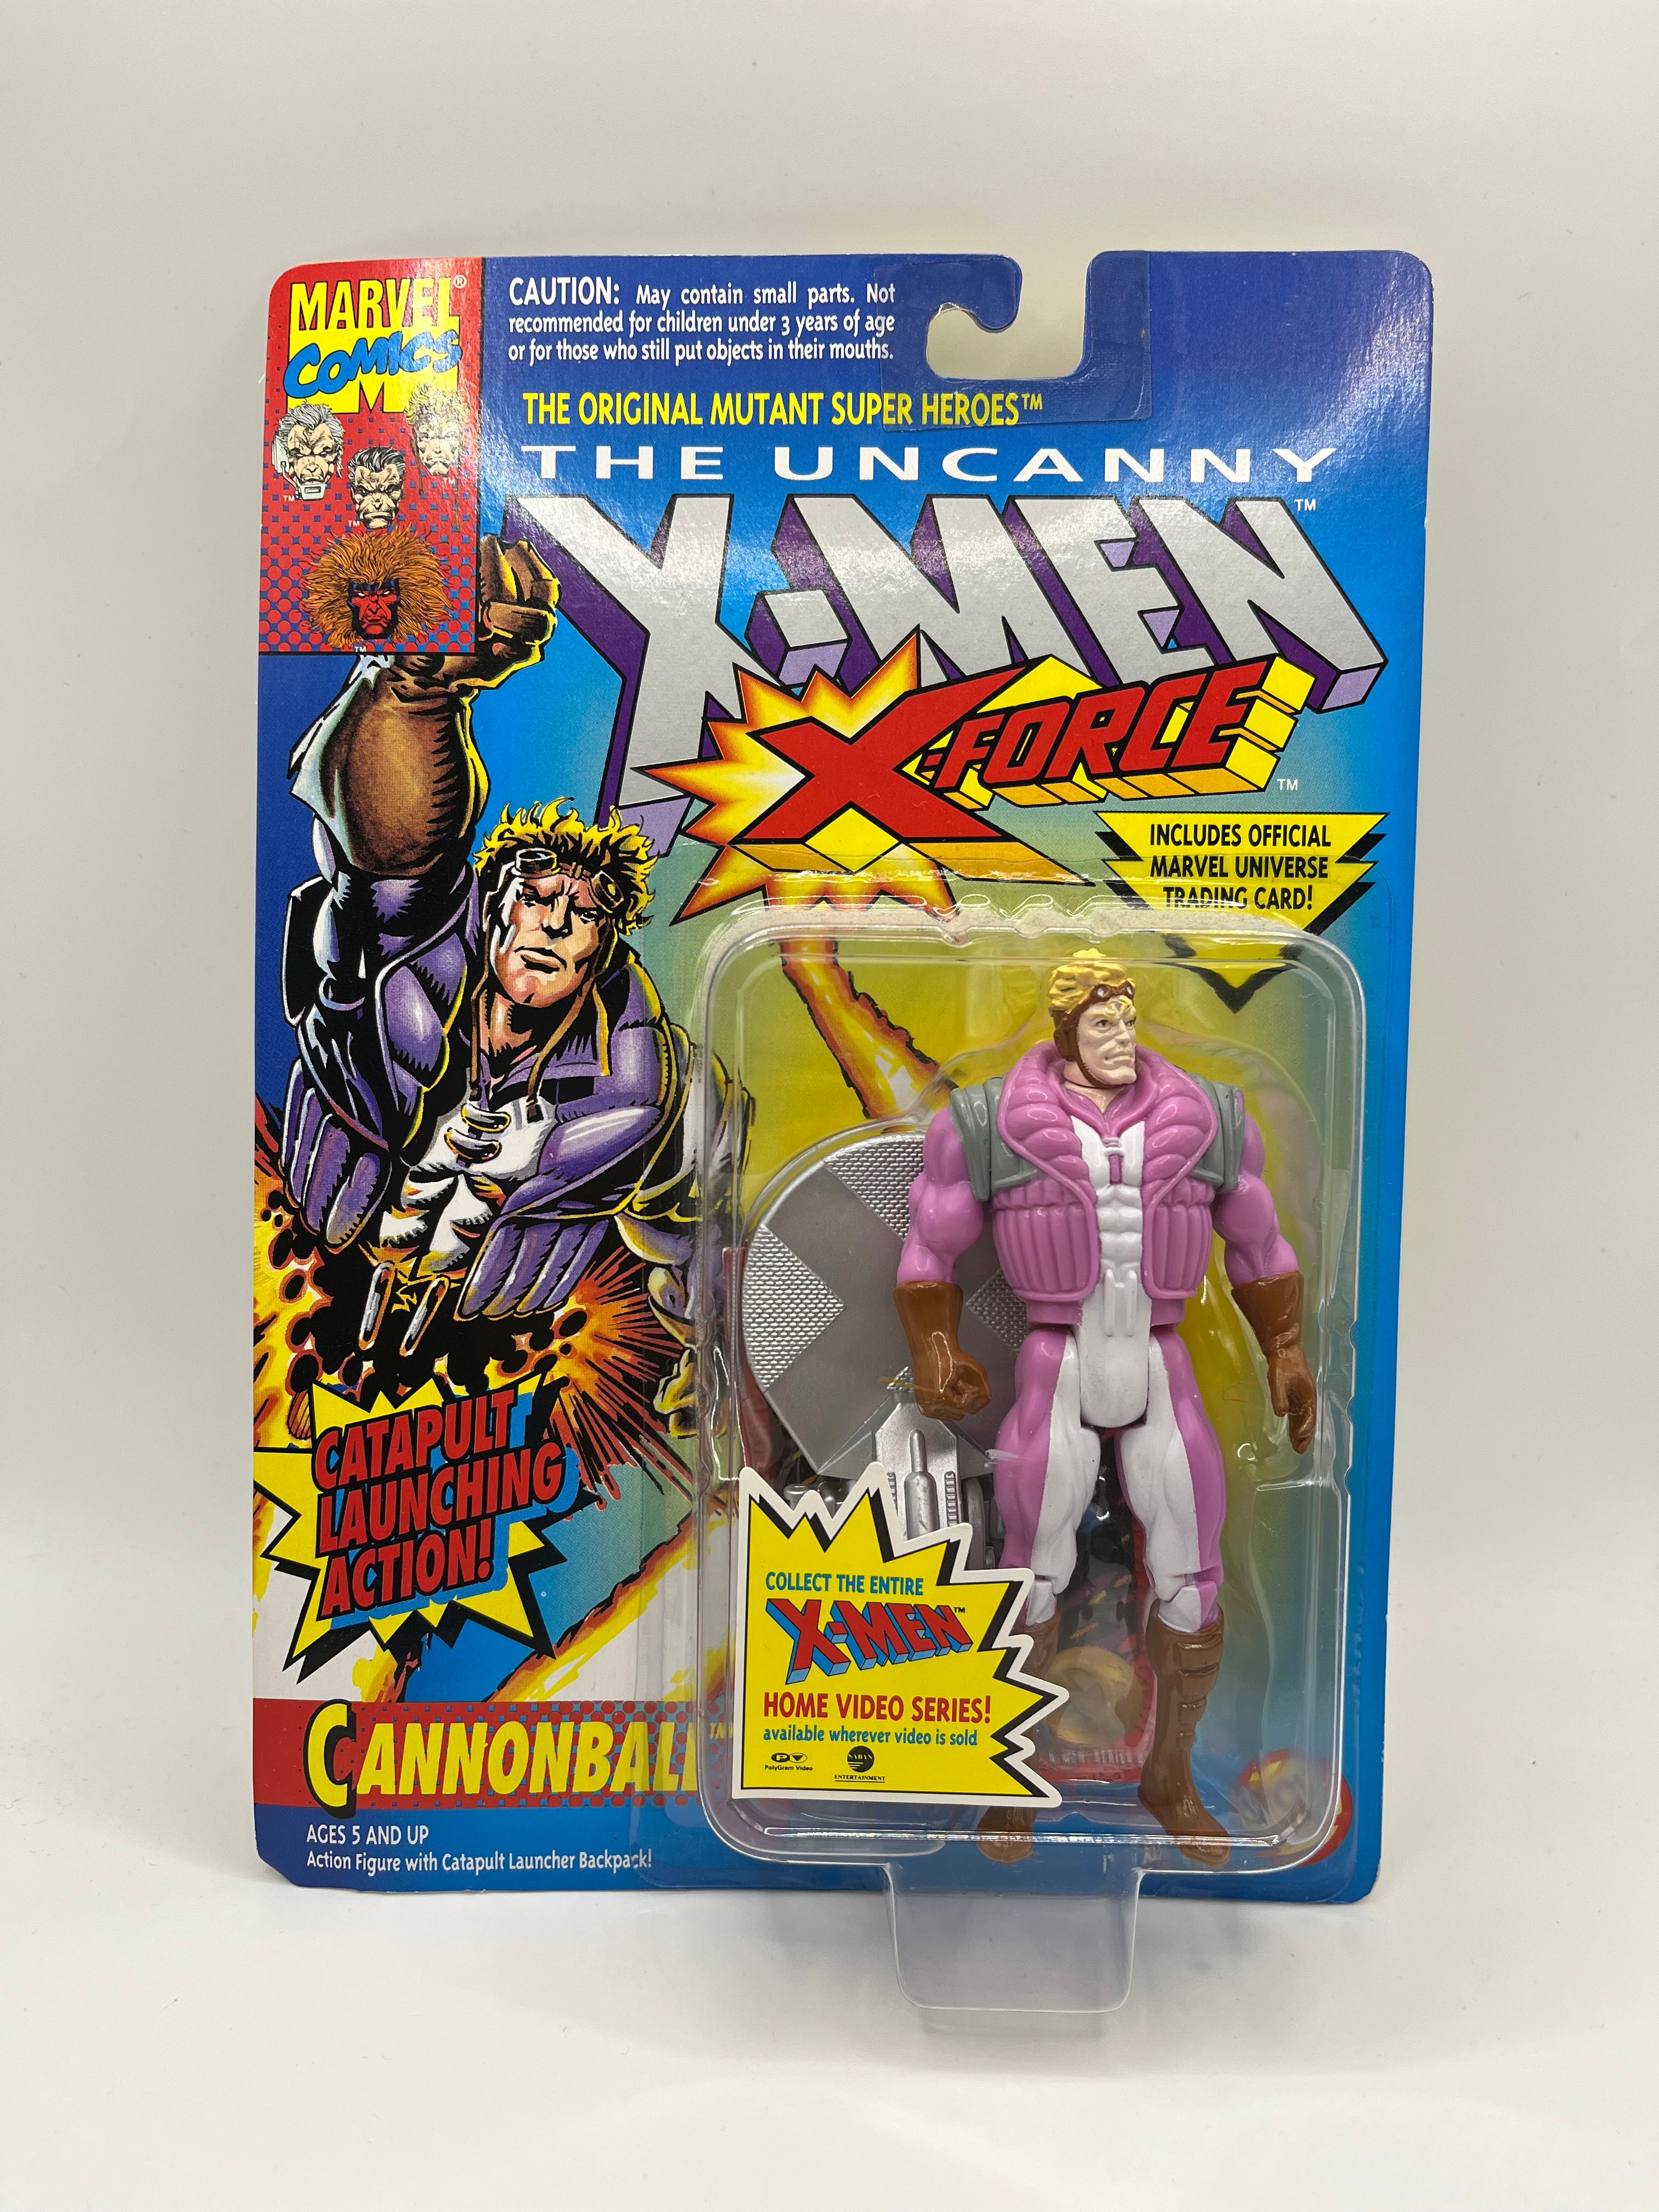 The Uncanny X-Men X-Force Cannonball Catapult Launching Action Toy Biz